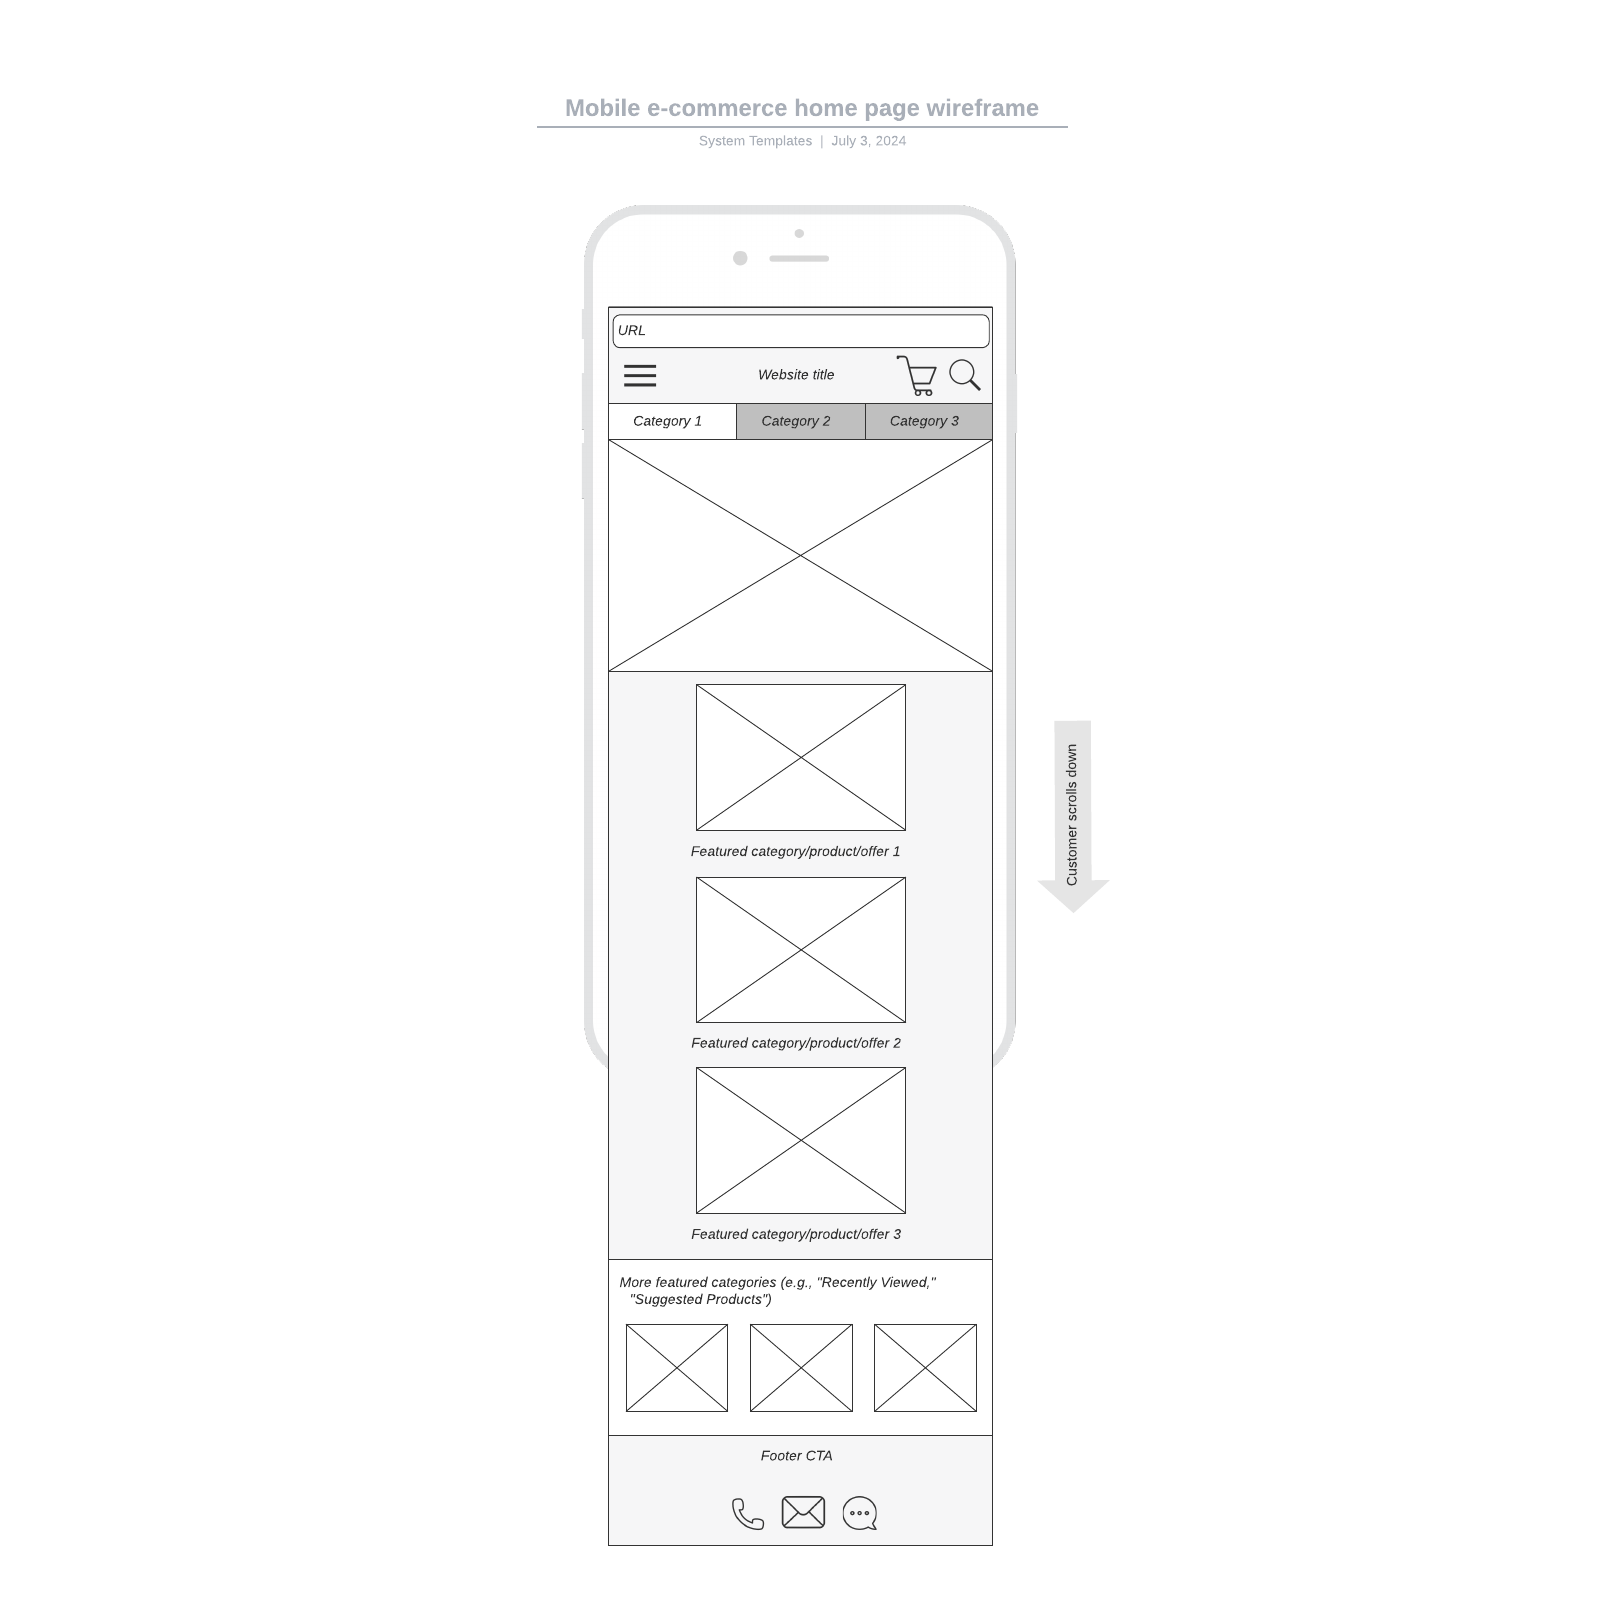 Mobile e-commerce home page wireframe example